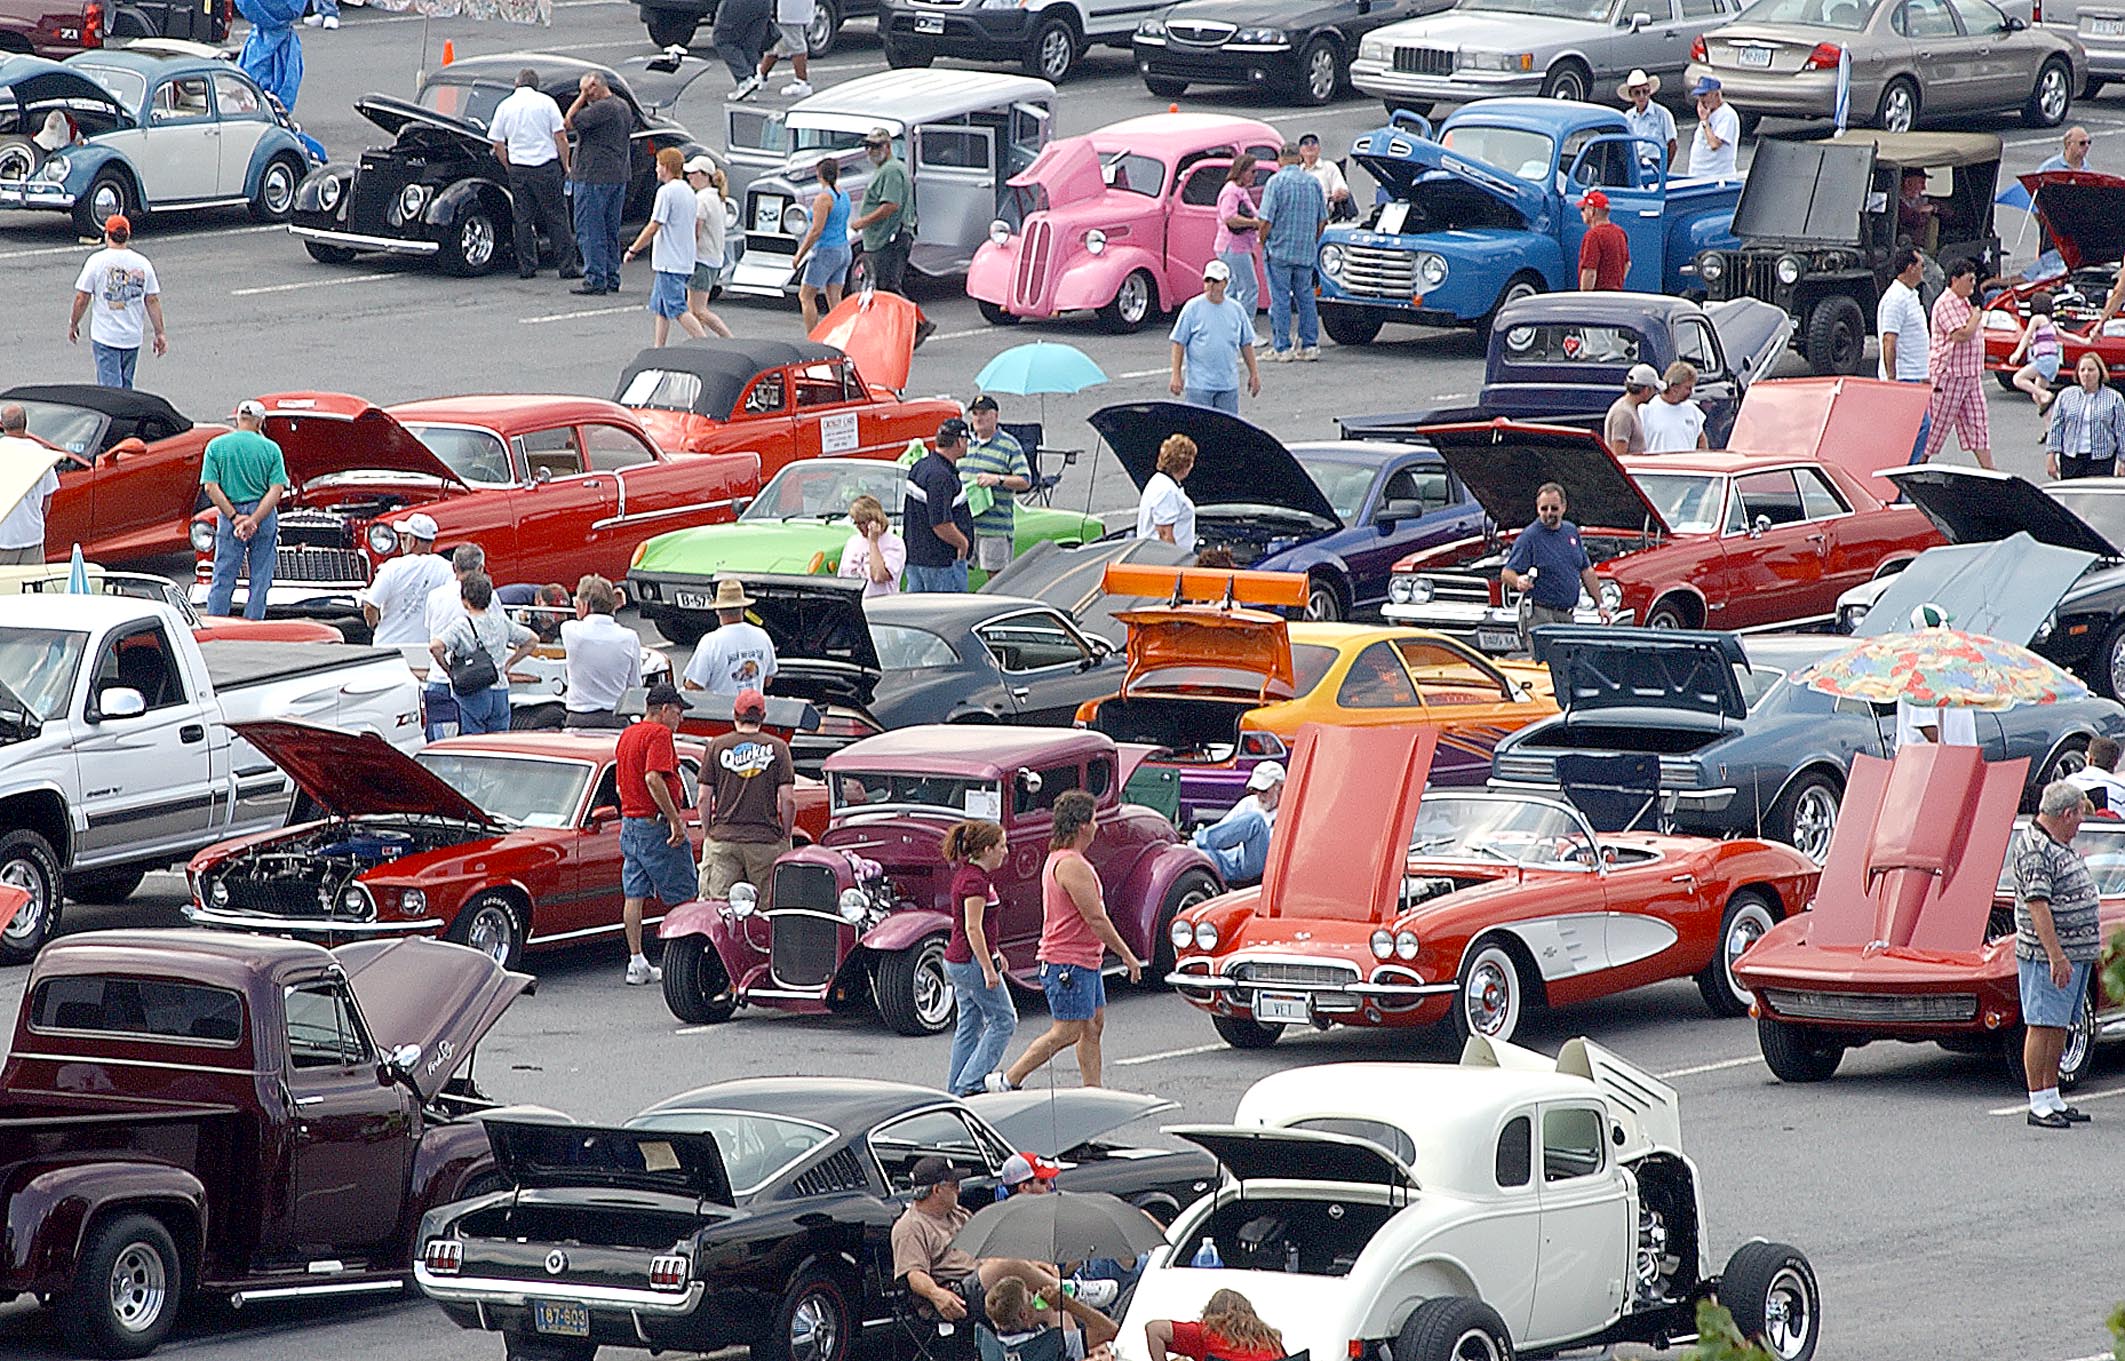 What is a classic car show?